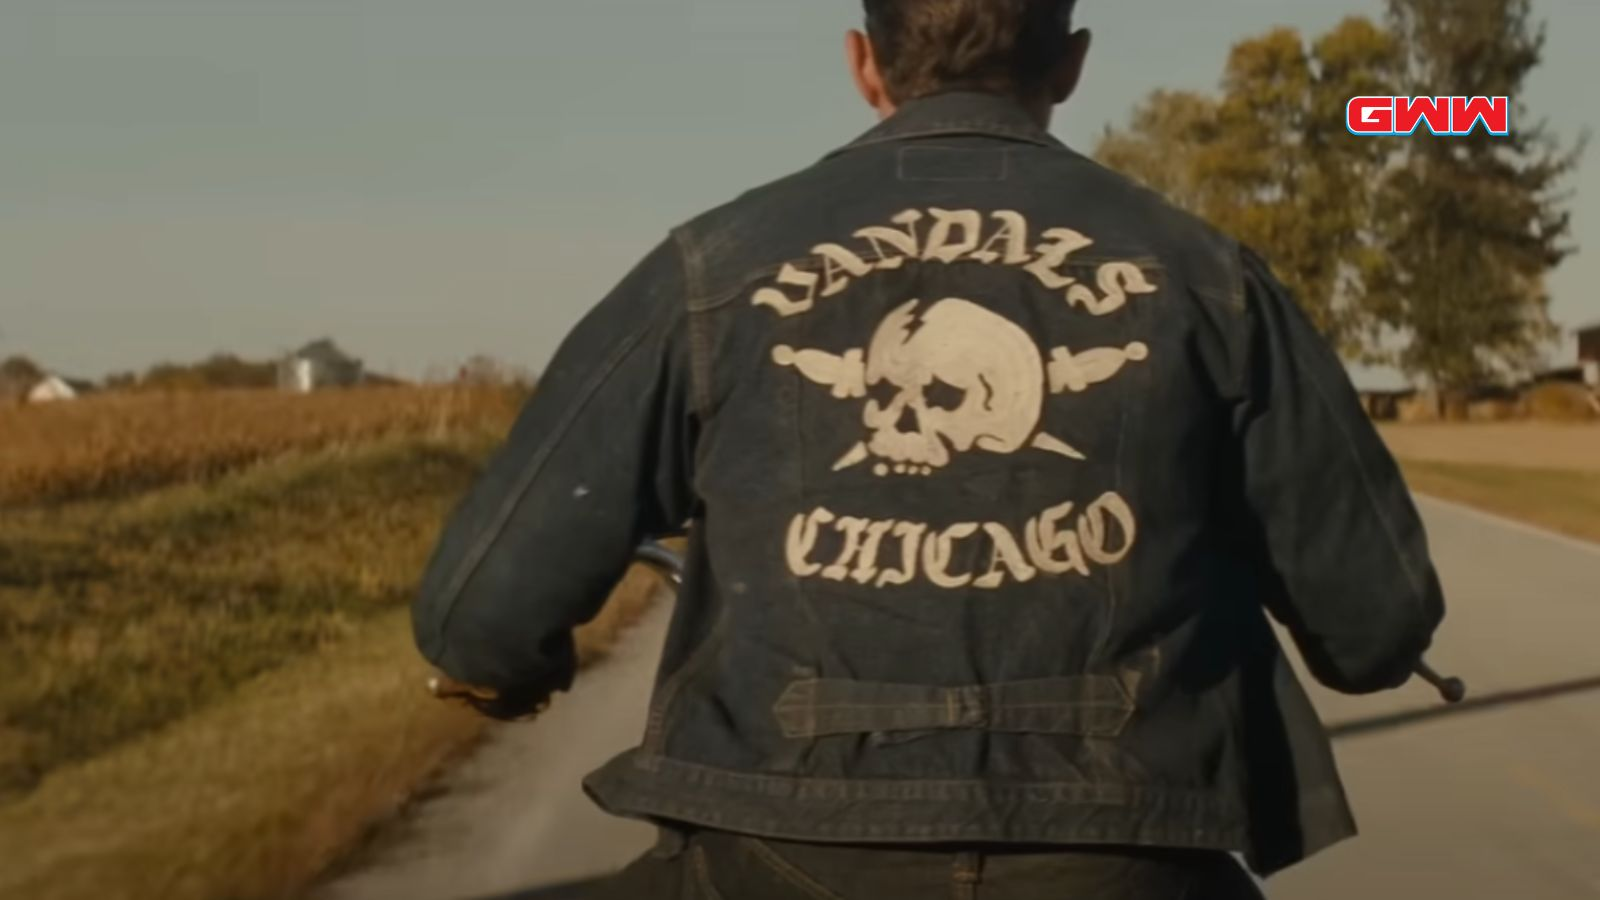 Back view of a biker wearing a "Vandals Chicago" jacket.